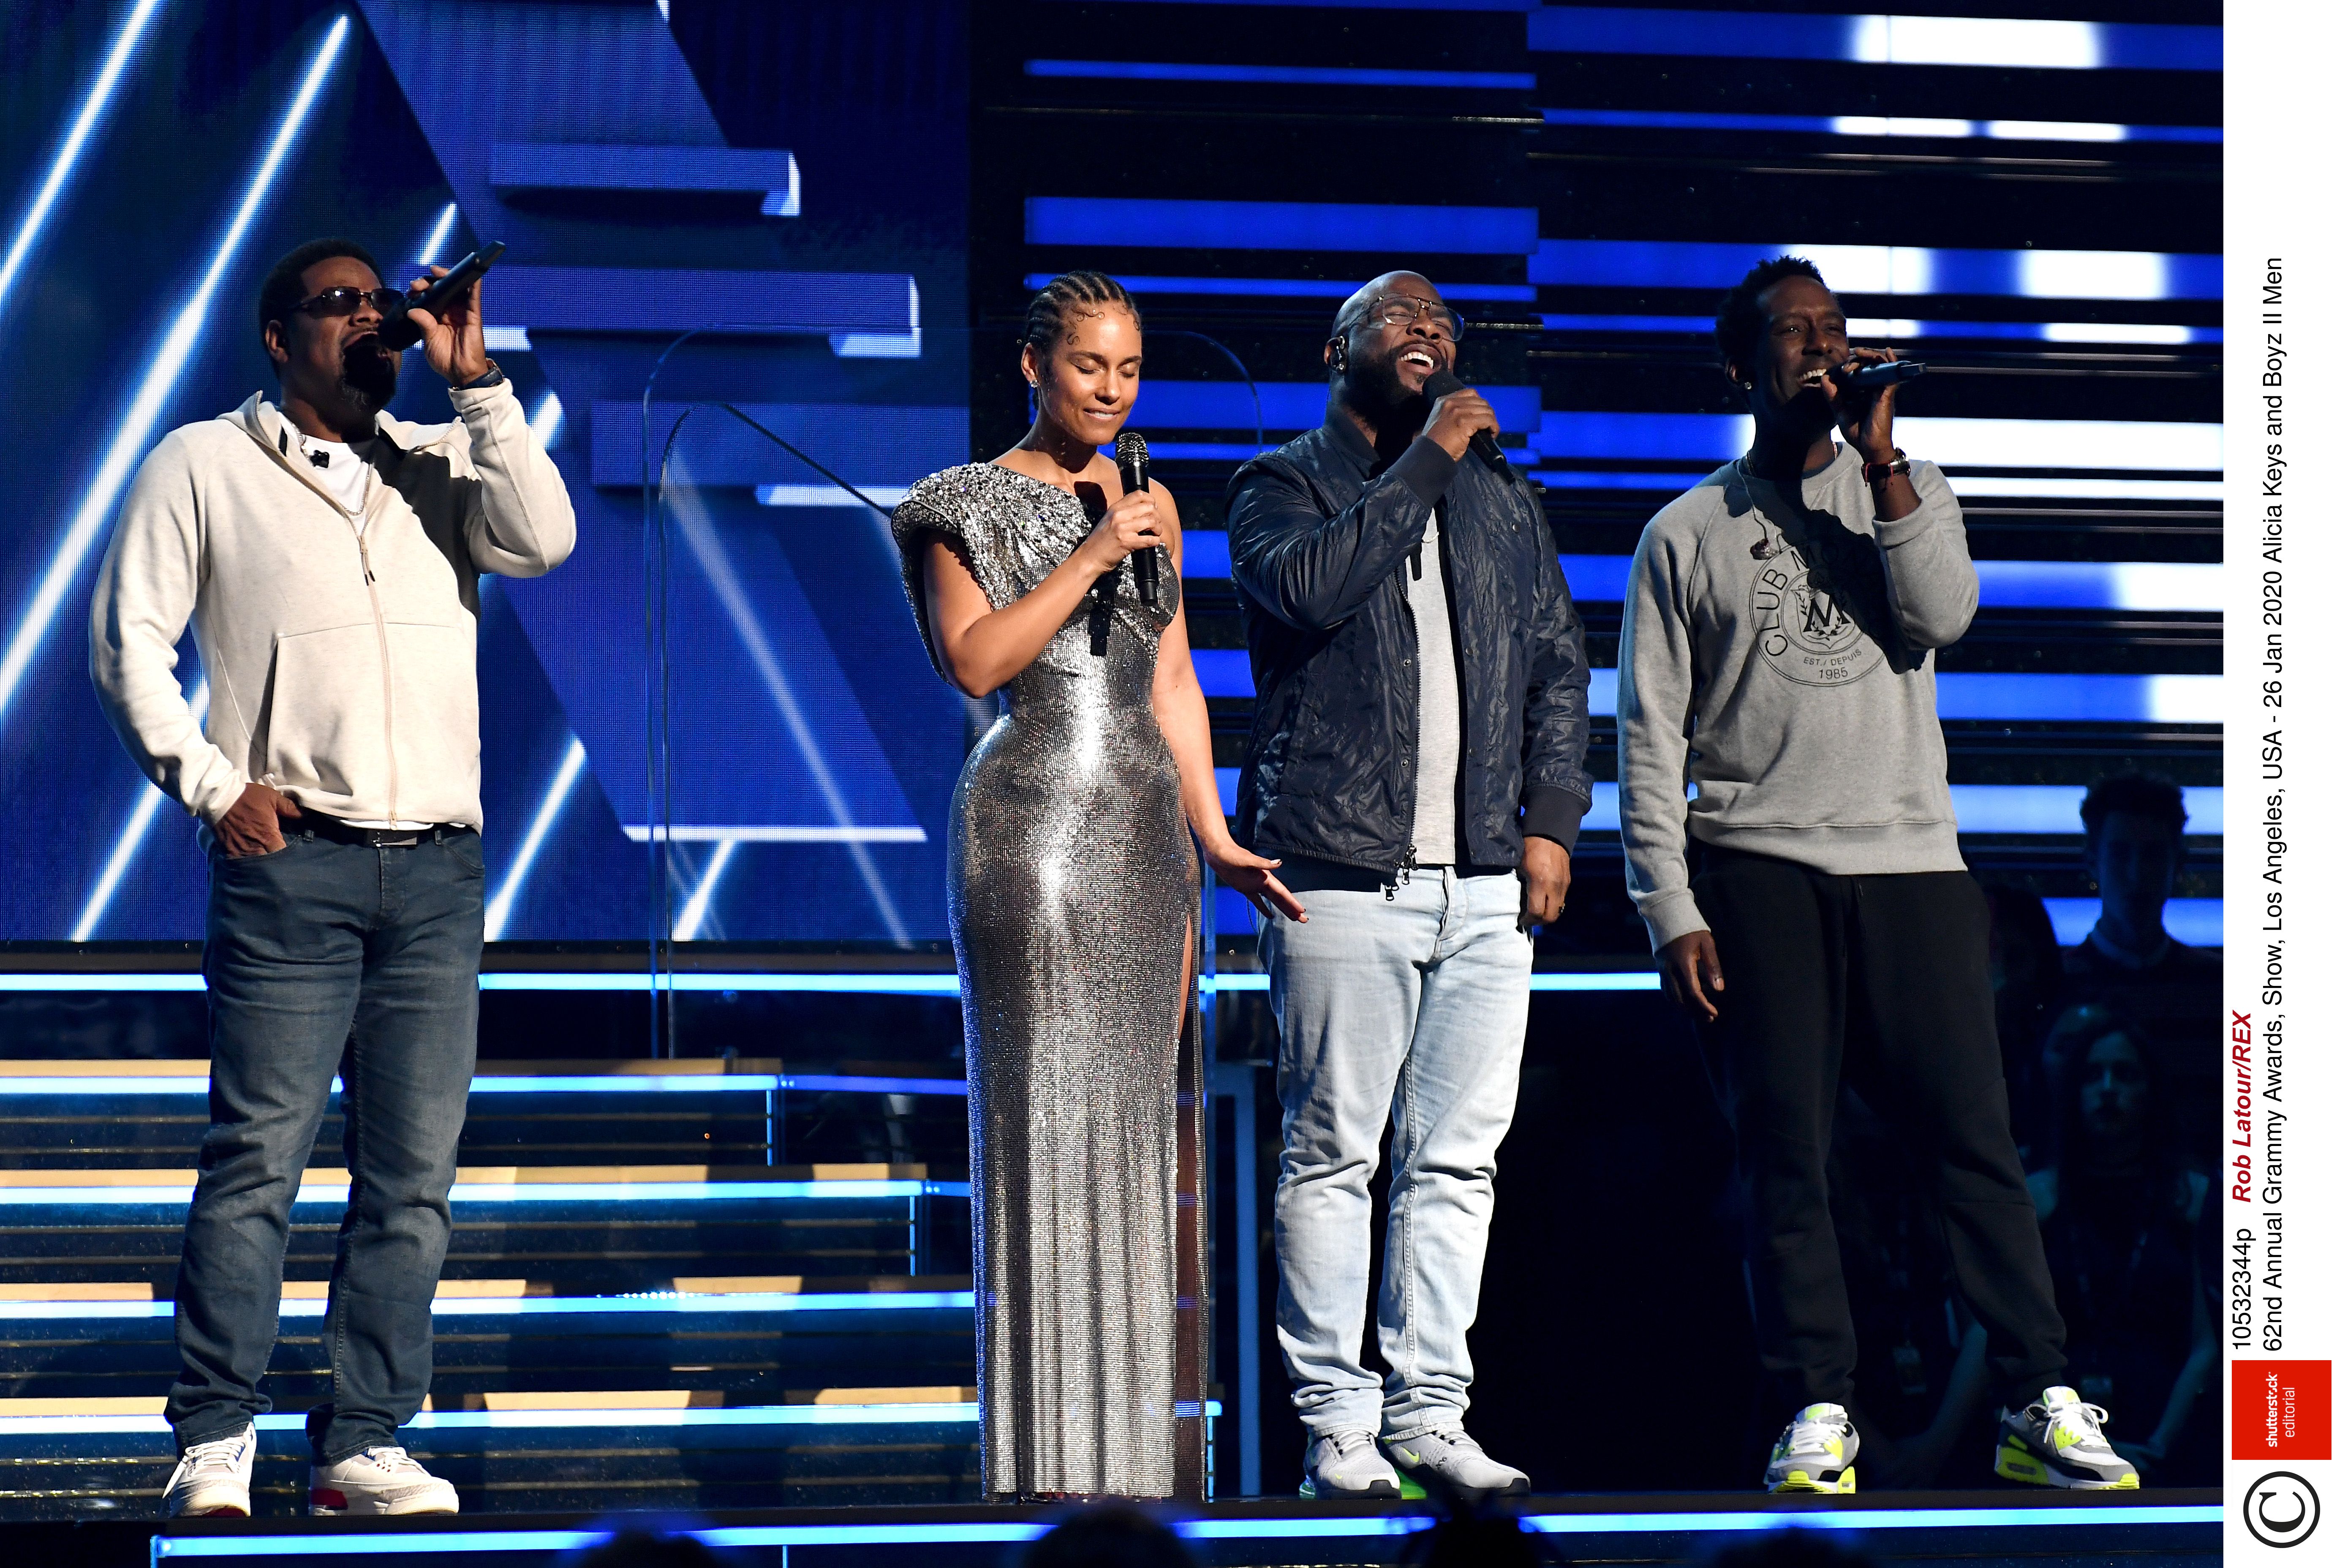 The clue that stumped the celebrity contestants had to deal with Boyz II Men